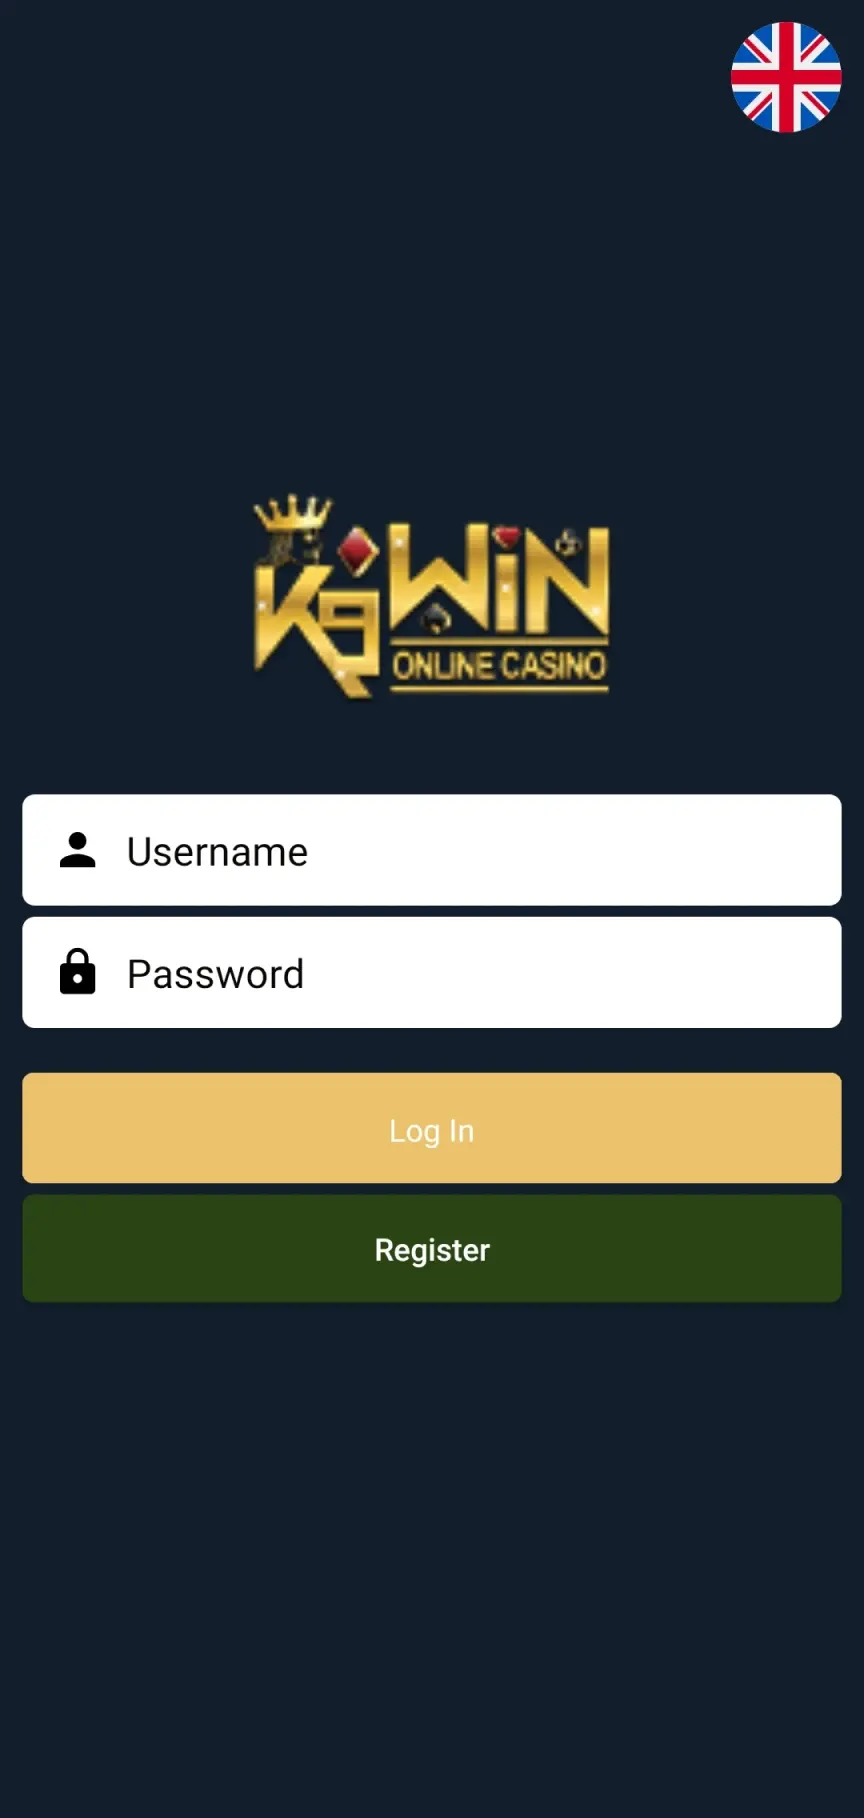 Make a new K9Win account in the app.